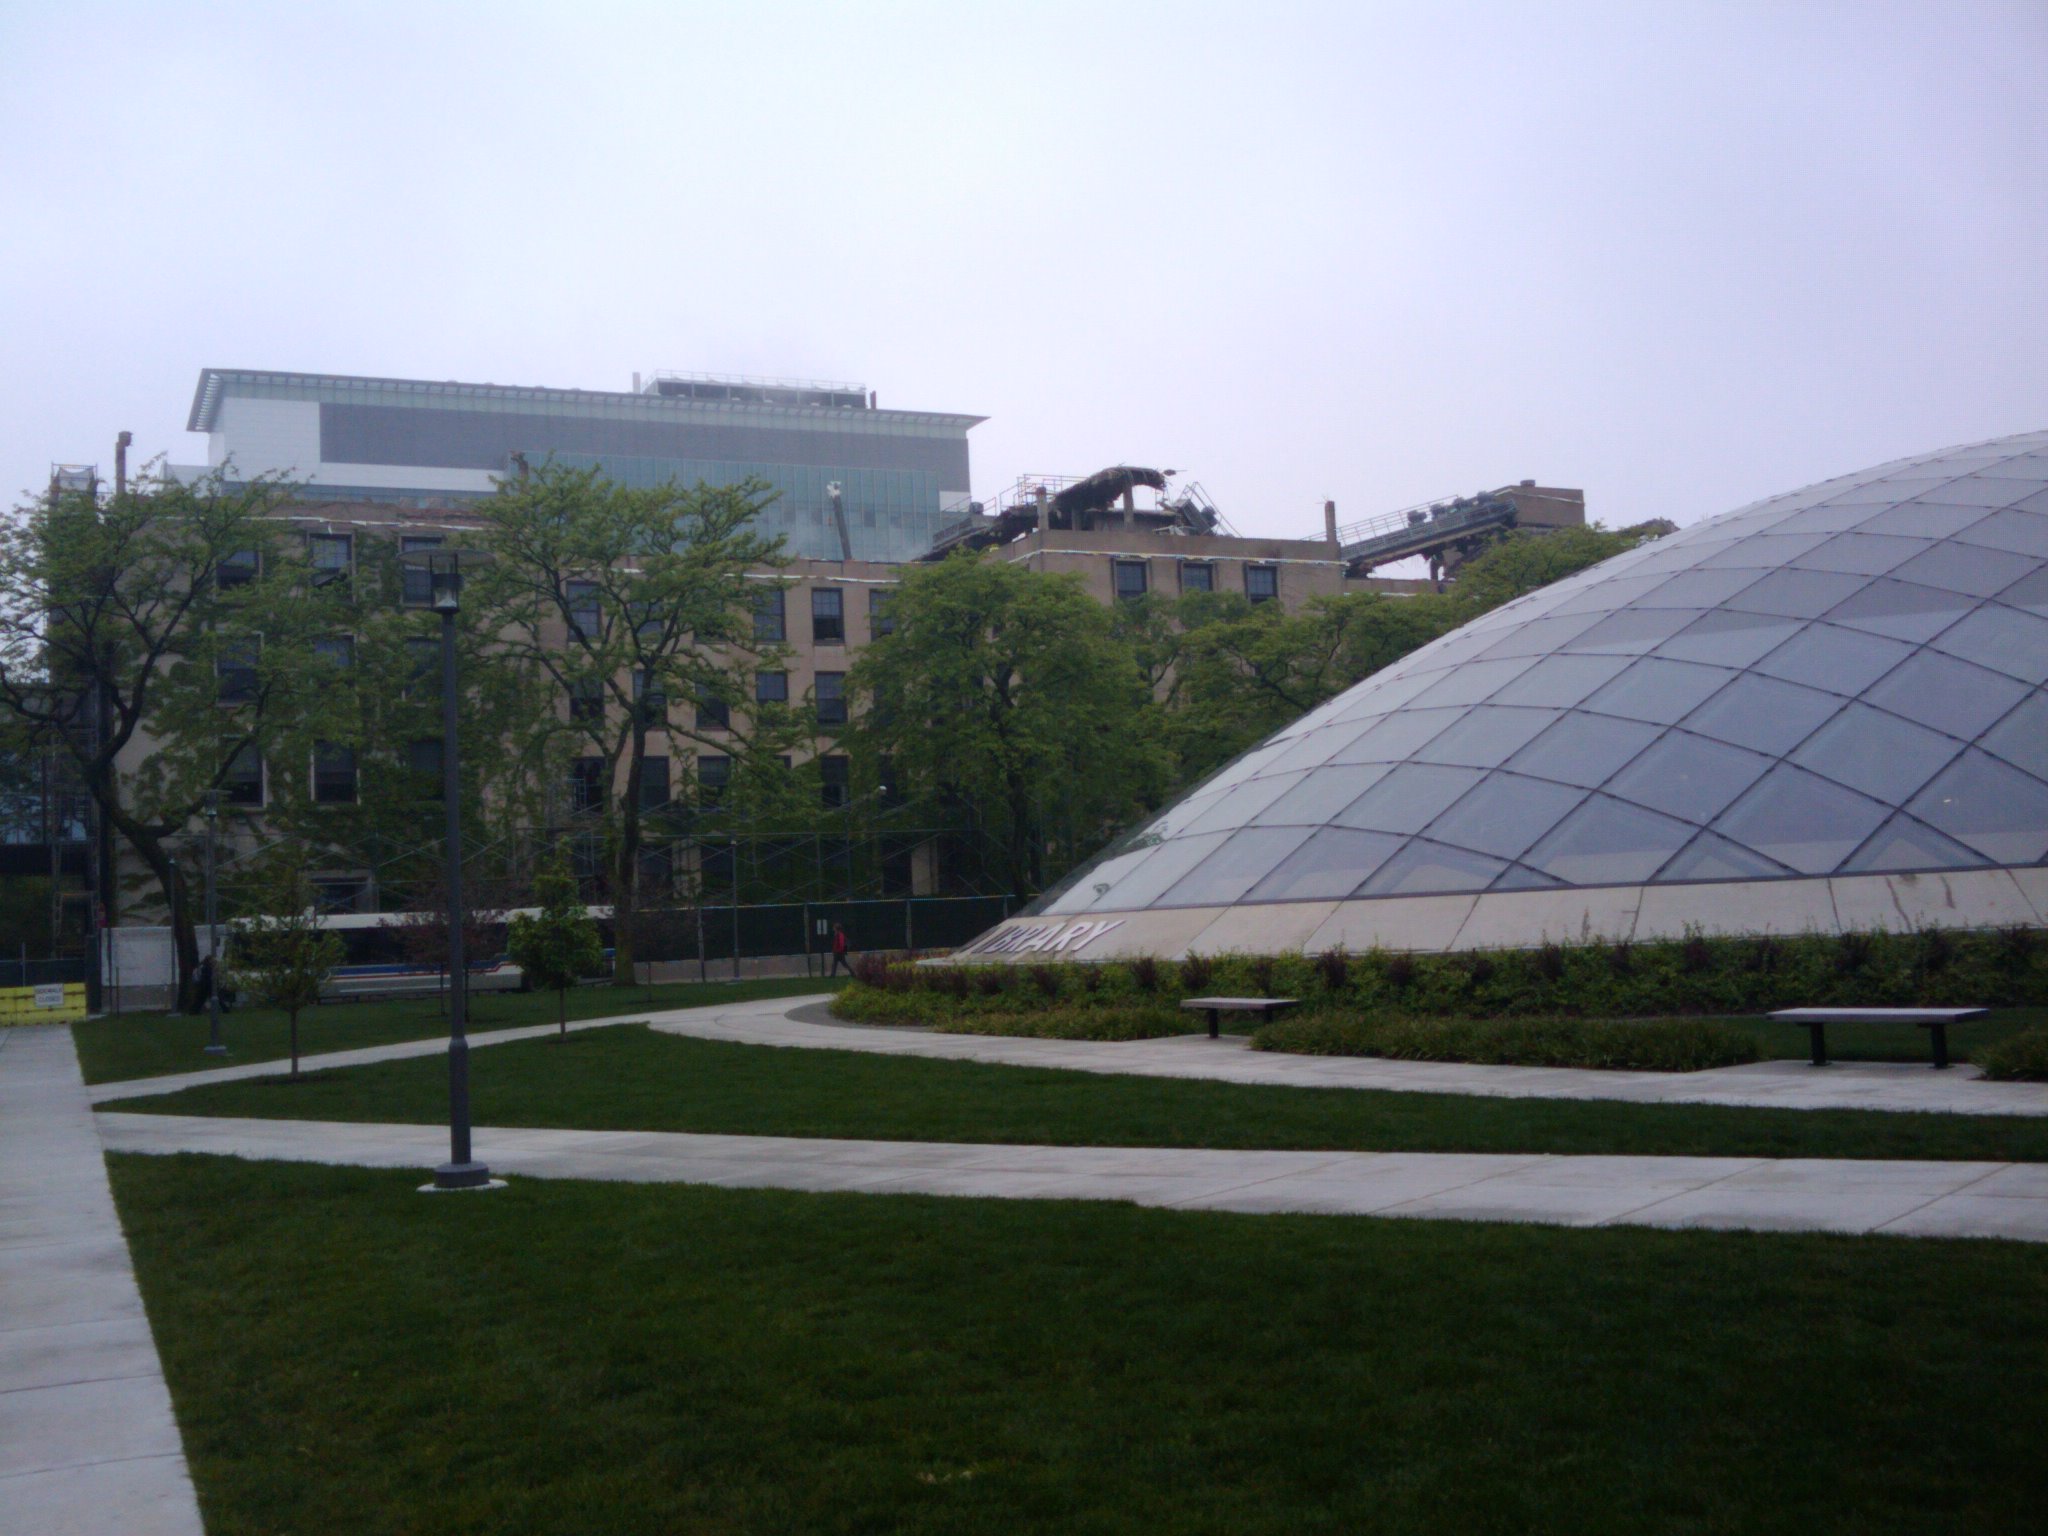 May
                    7th, 2012--front of Resarch Institutes (library in
                    foreground)